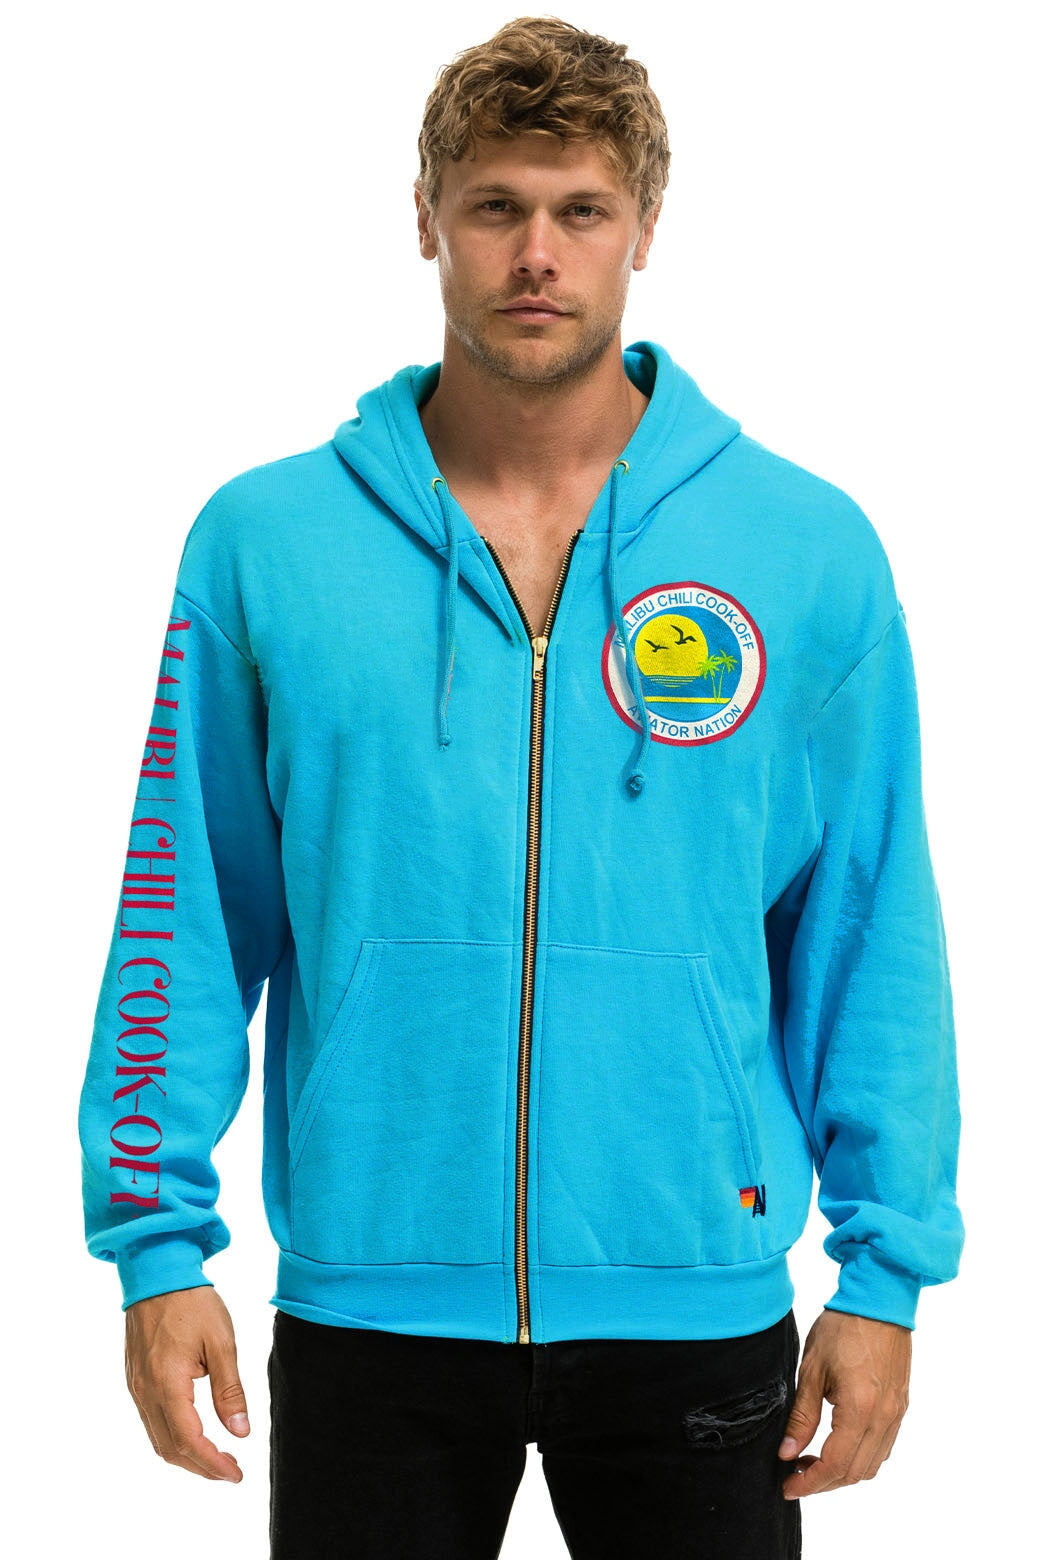 MALIBU CHILI COOK-OFF 2023 CROPPED PULLOVER HOODIE RELAXED - NEON